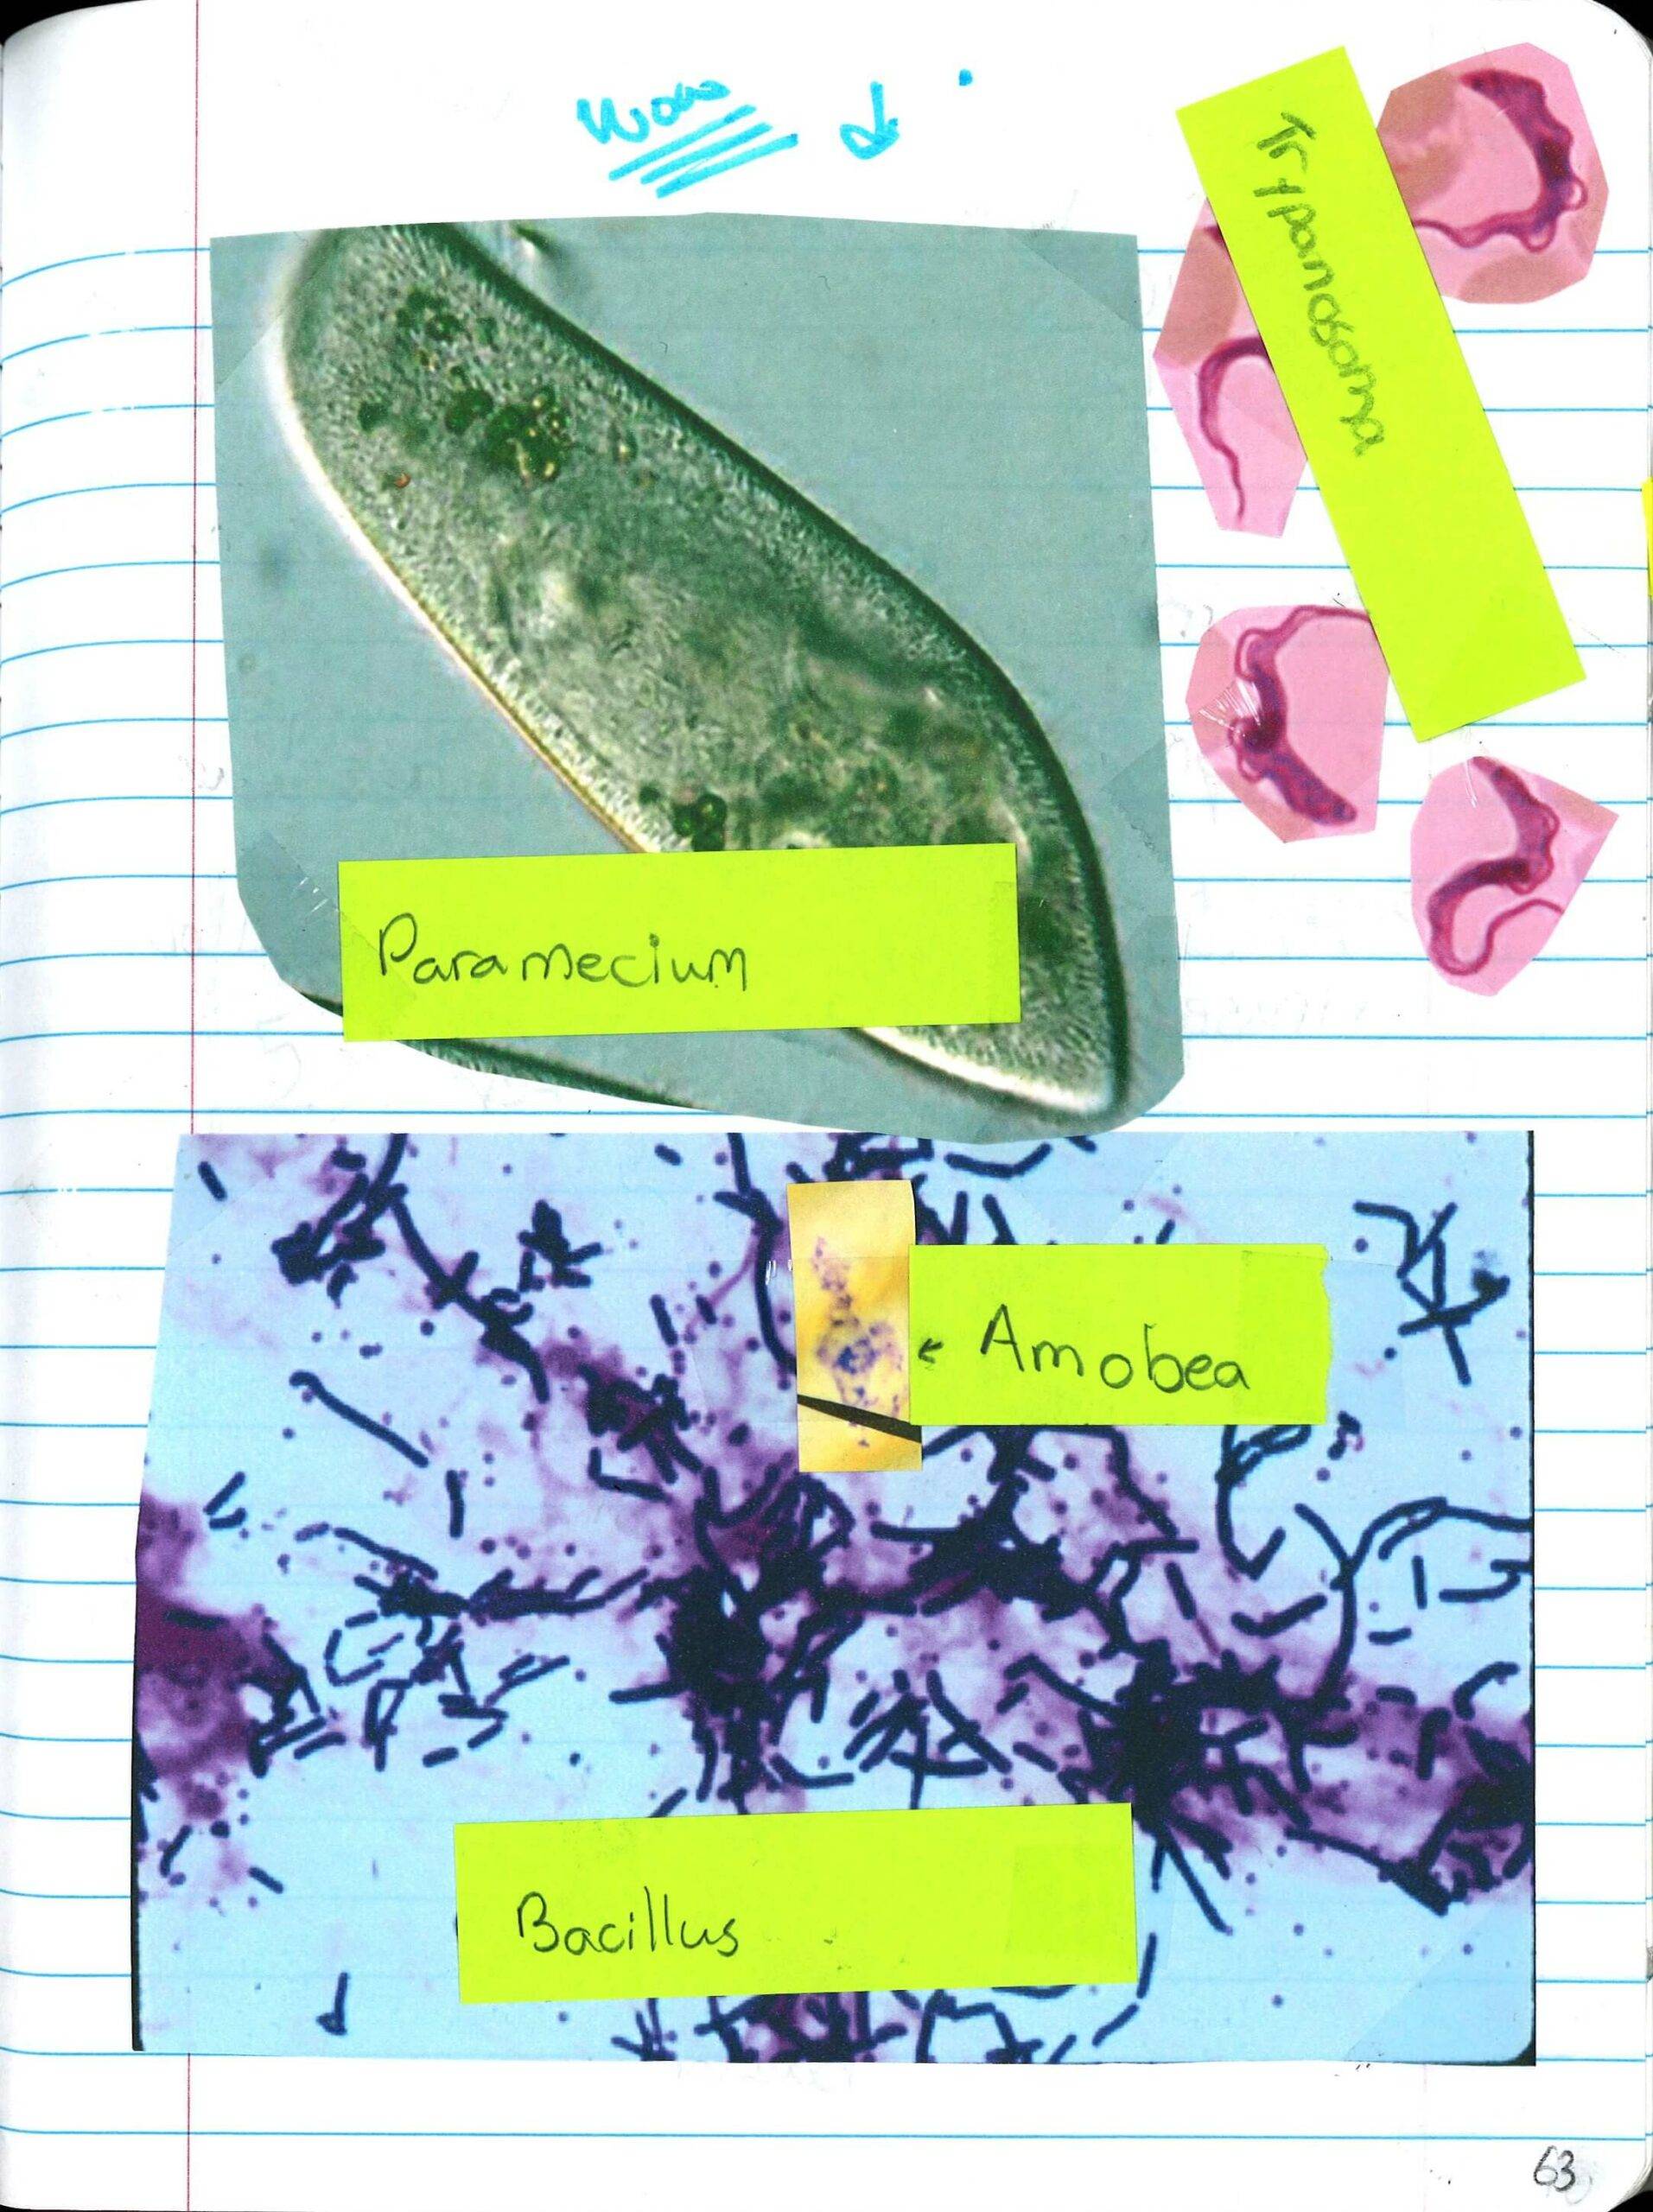 Note-Taking Science - Visual Images printed & added